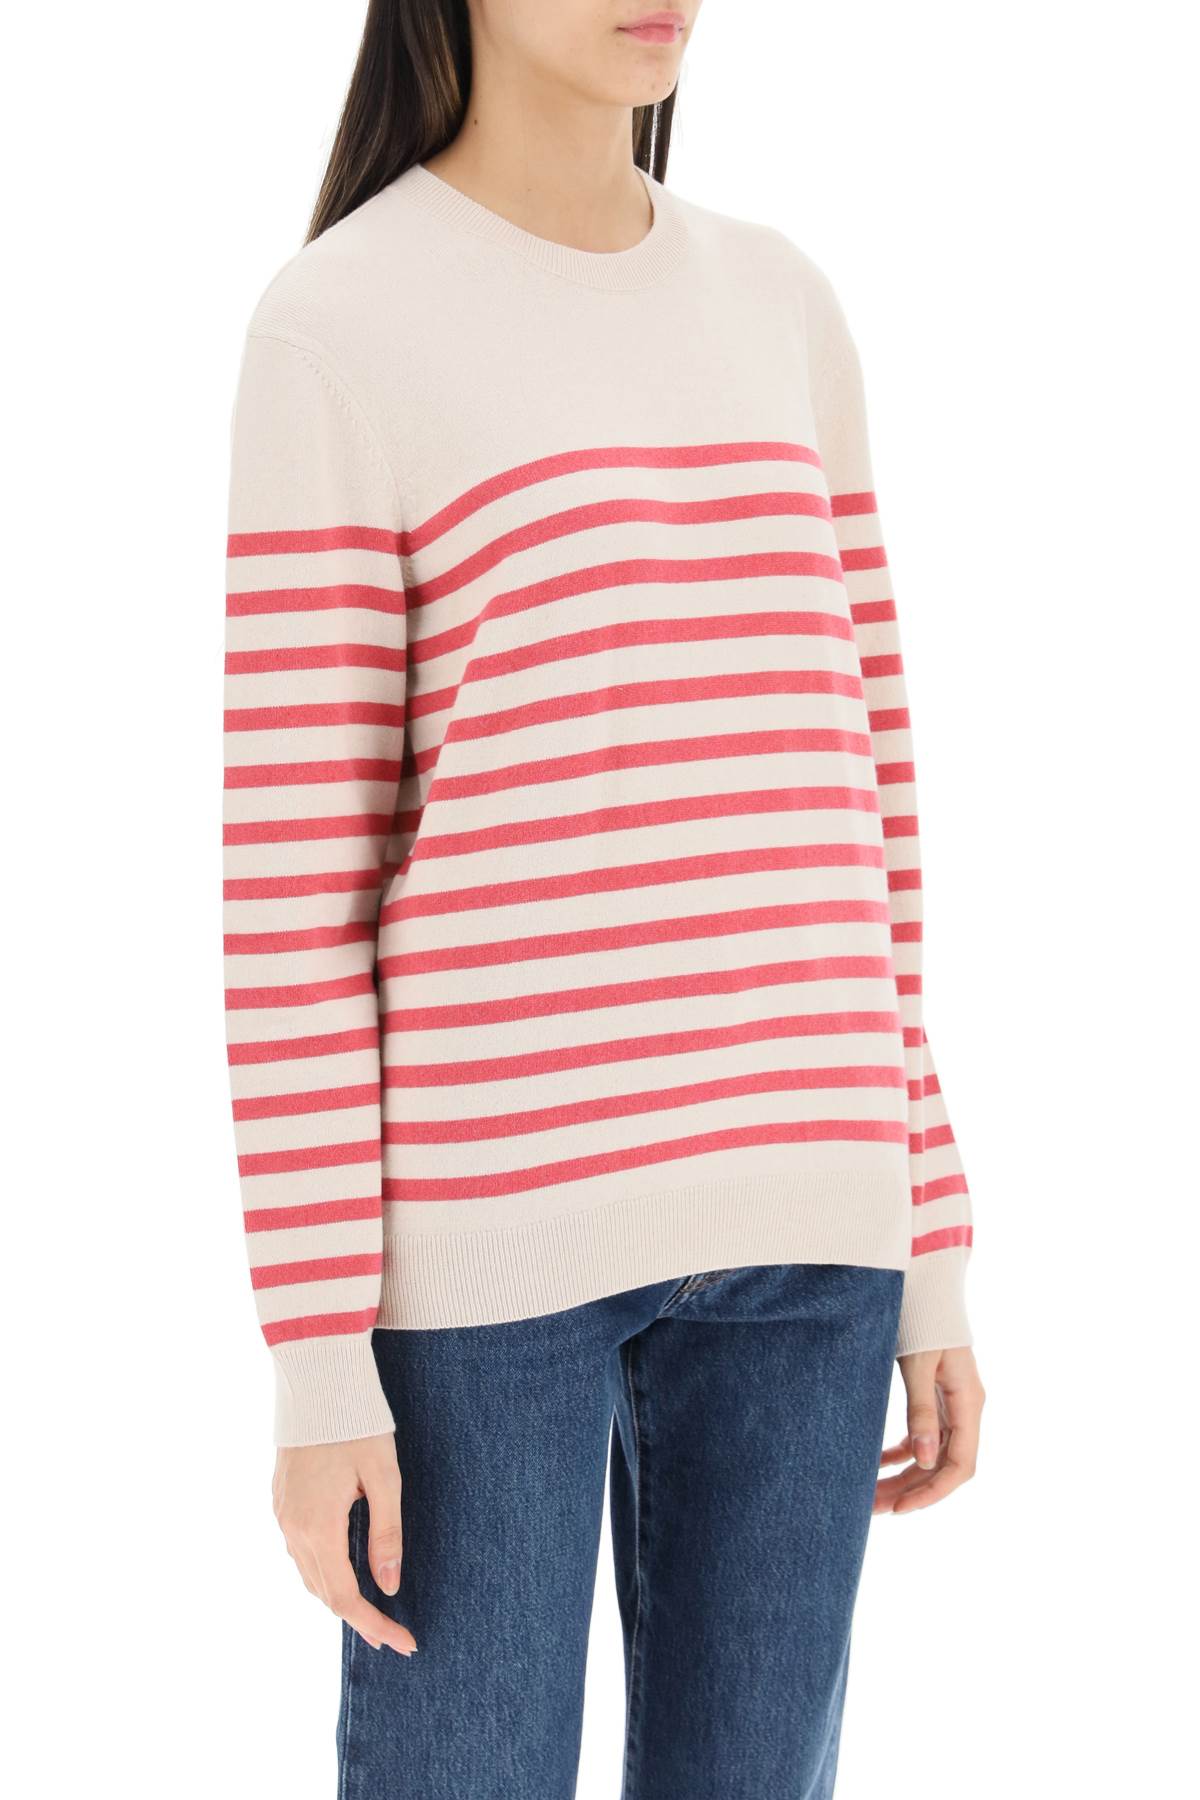 A.P.C. A.p.c. 'phoebe' striped cashmere and cotton sweater